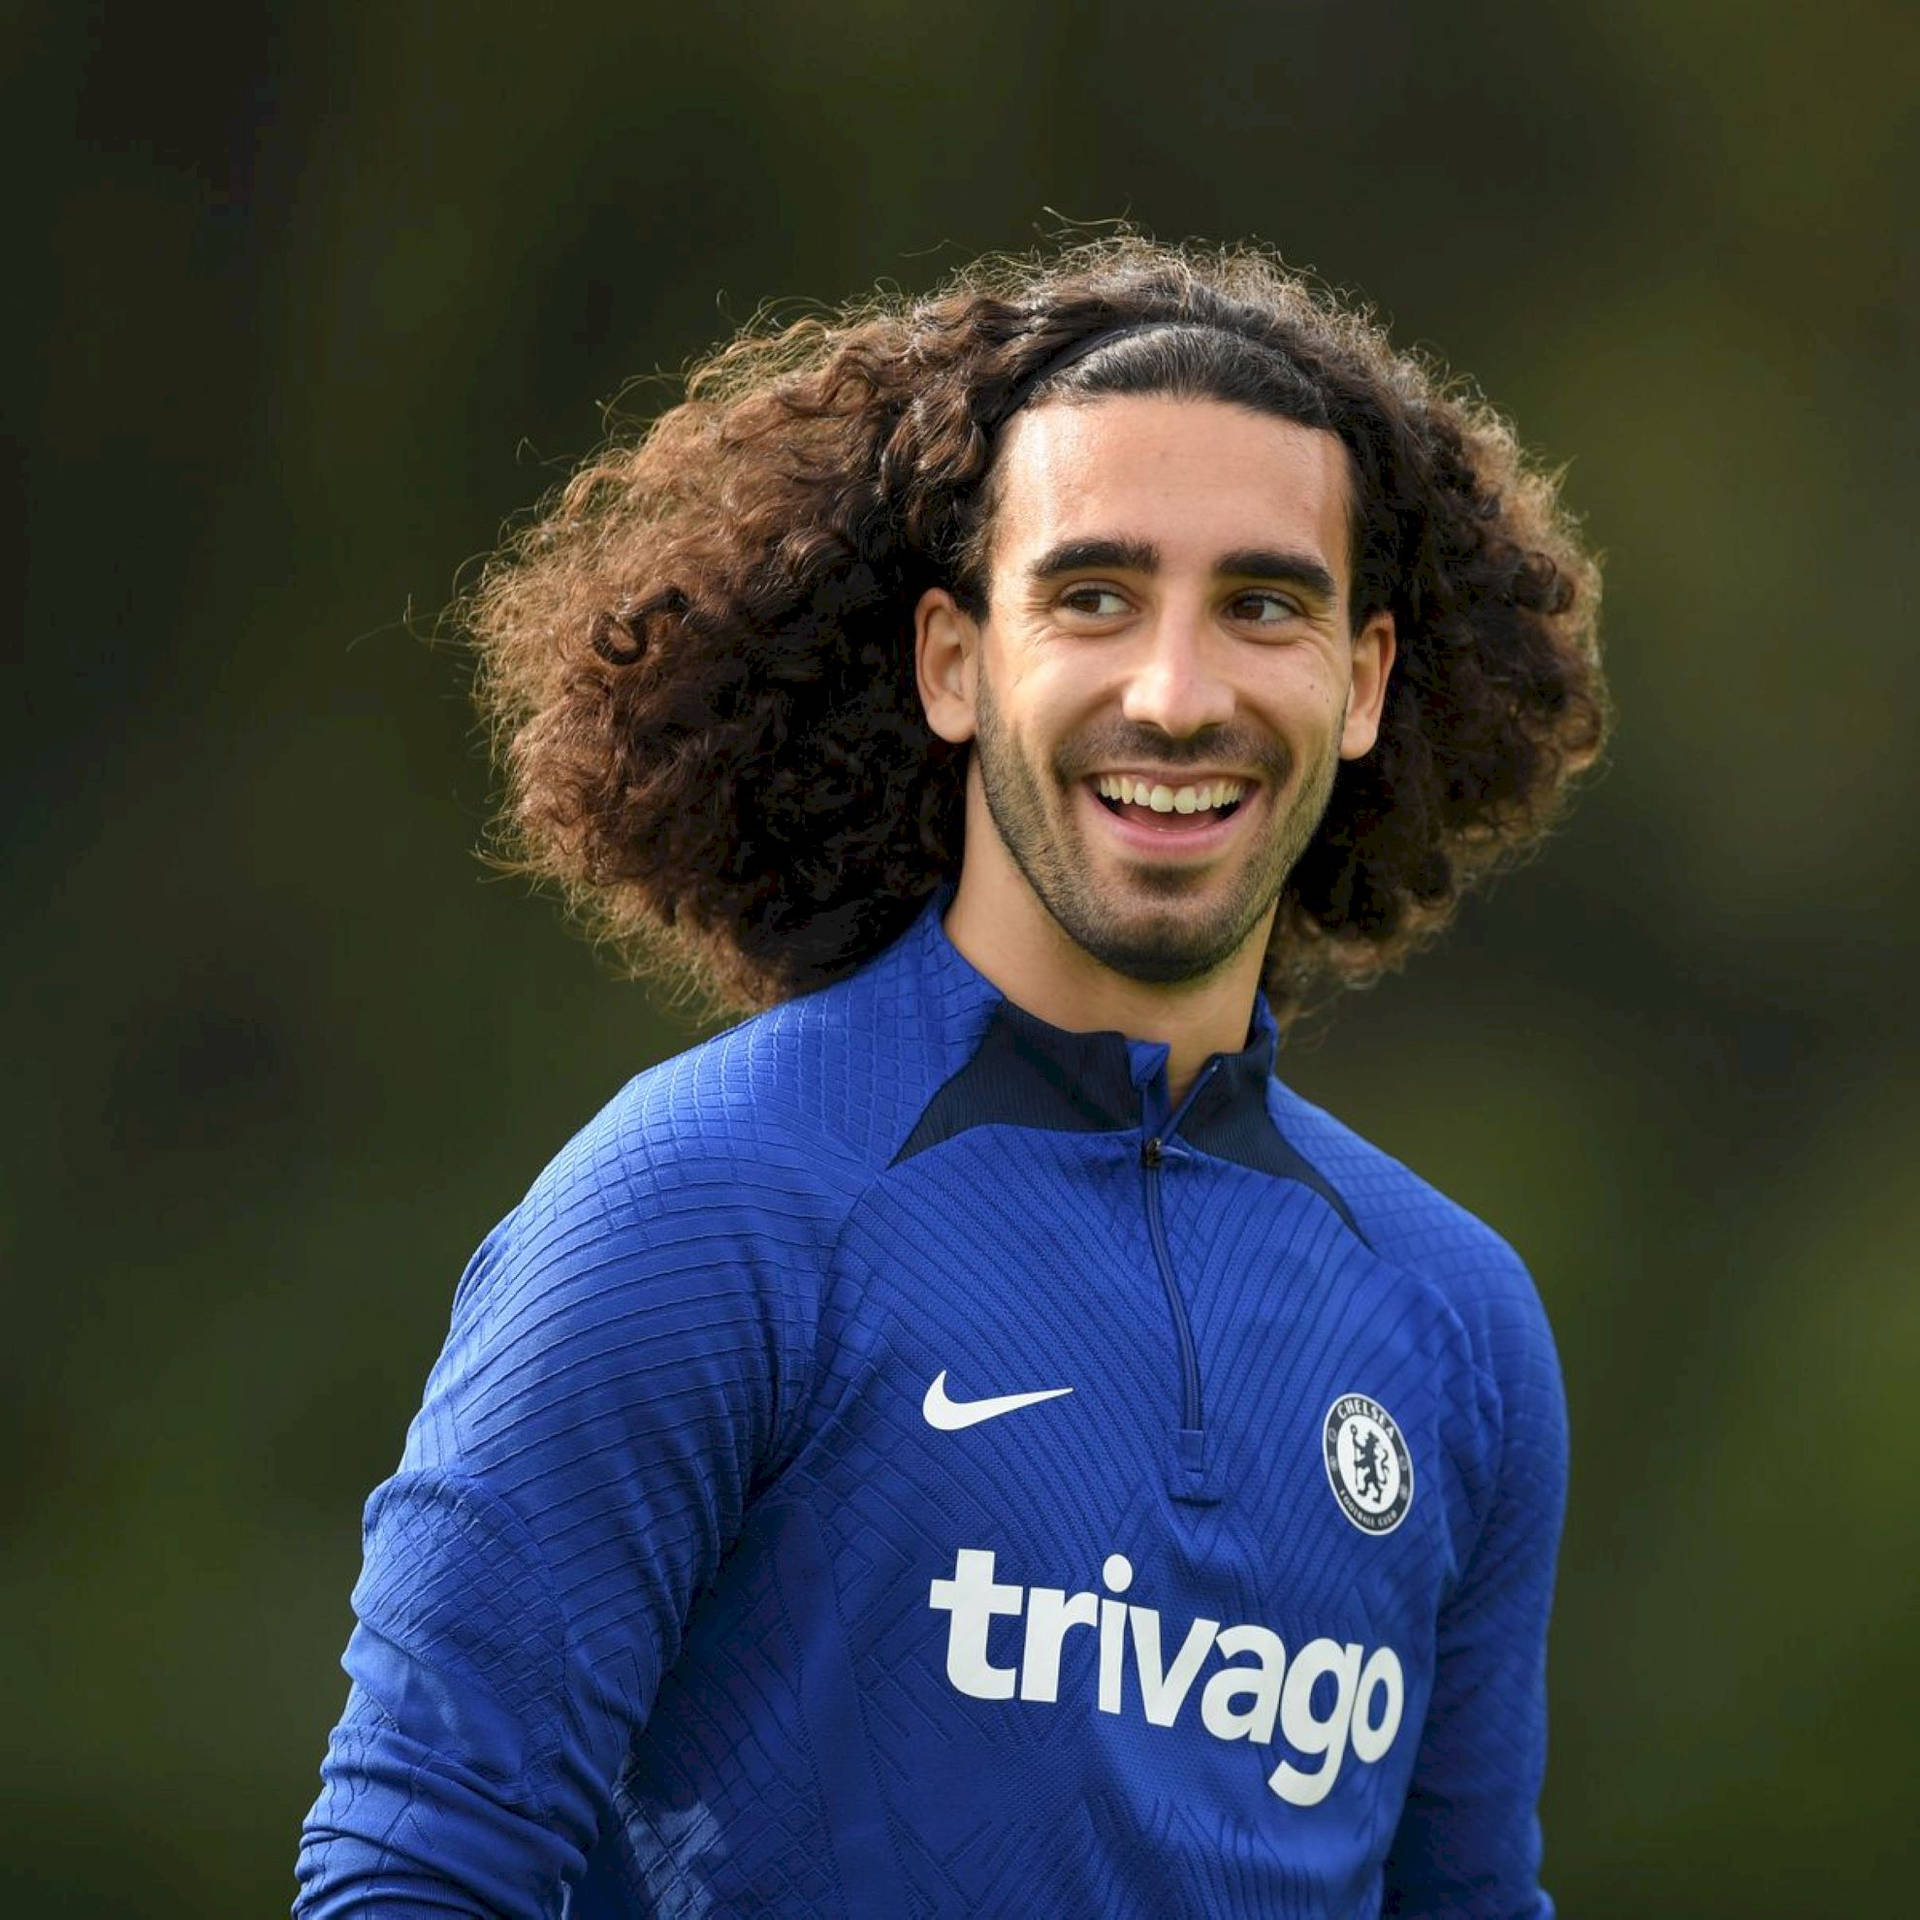 Marccucurella Nike Trivago Is A Name Or Phrase That Does Not Have A Direct Translation In Italian In The Context Of Computer Or Mobile Wallpapers. However, If You Provide More Context Or Clarify What You Want To Express, I Can Help With The Translation. Sfondo